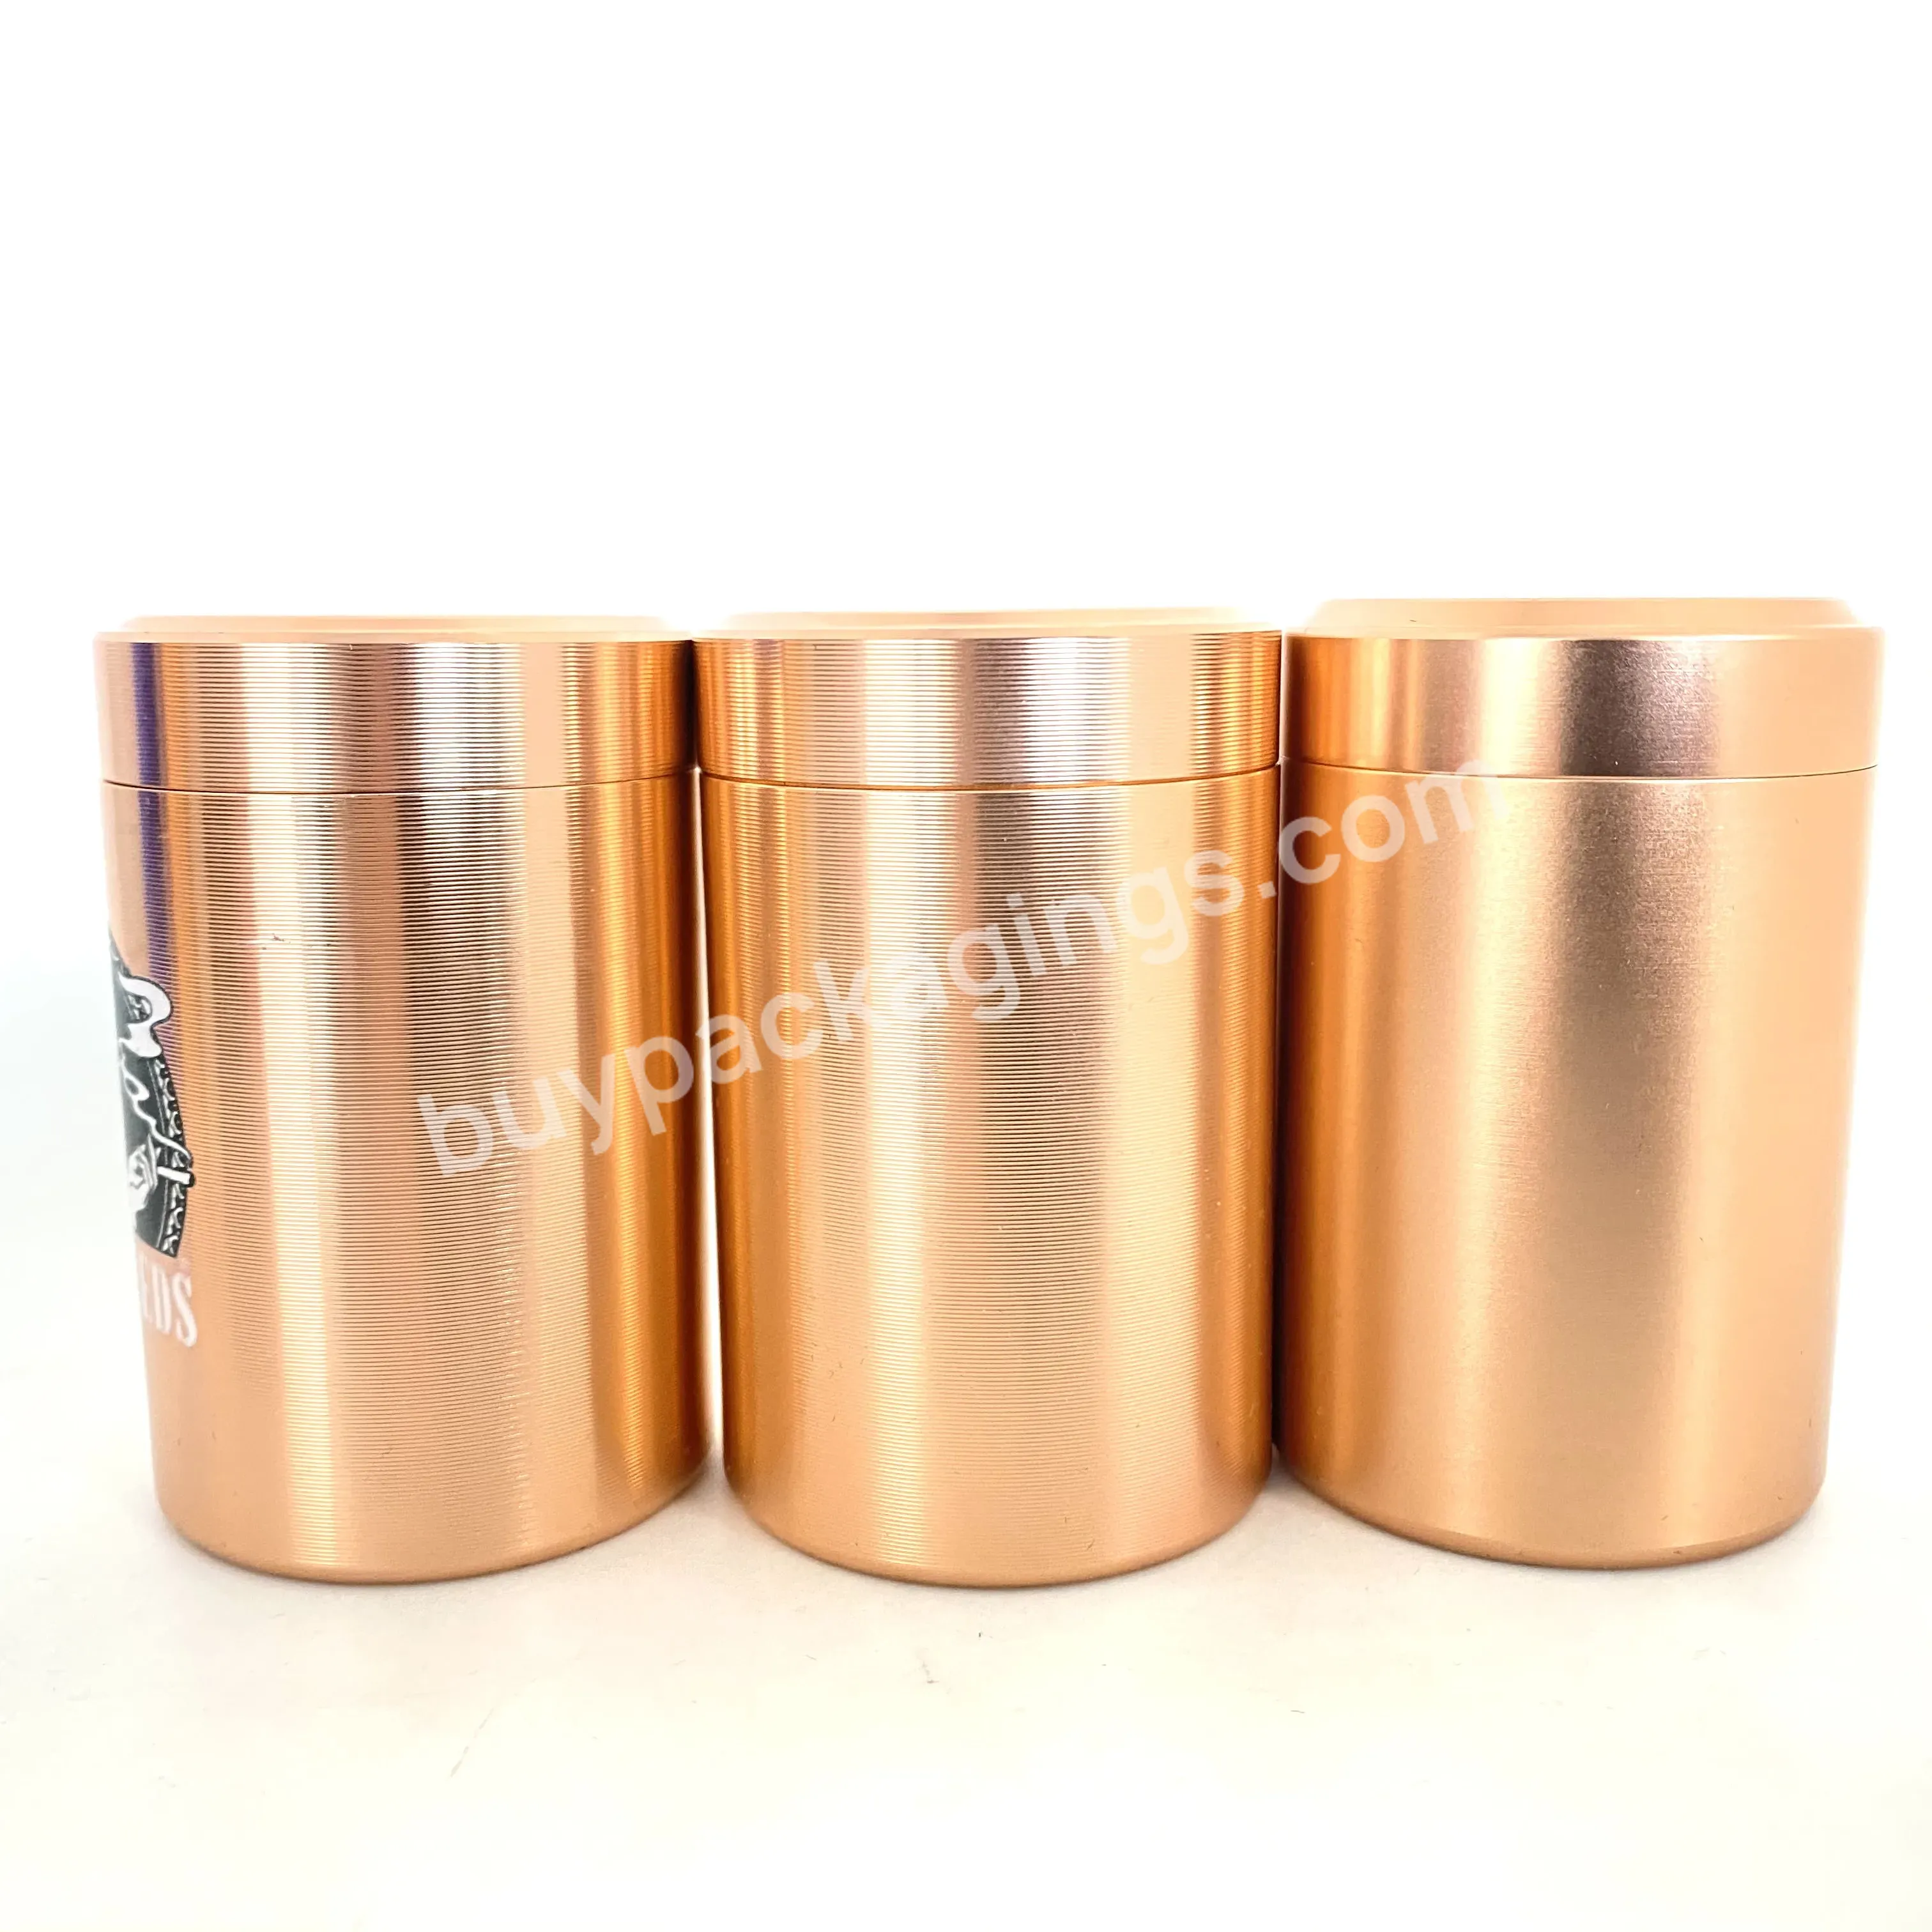 Small Mini Tall Round Metal Storage Tea Packaging Tin Box Can Container With Screw Lid Manufacturer - Buy Storage Tea Packaging Tin Box Can Container,Round Metal Tea Can With Screw Lid,Small Mini Tall Tea Jar Metal.